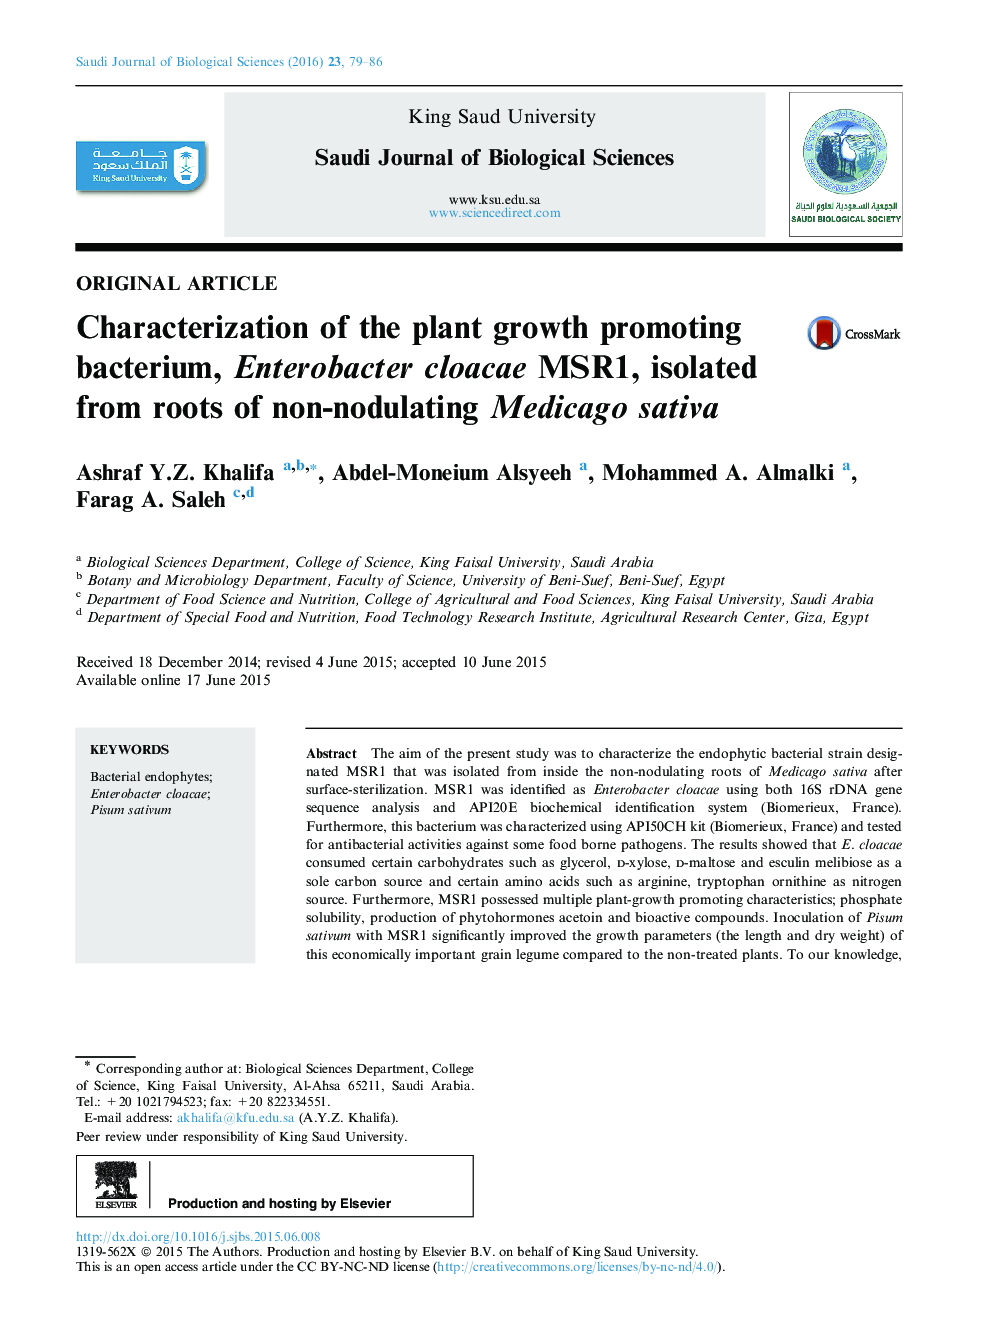 Characterization of the plant growth promoting bacterium, Enterobacter cloacae MSR1, isolated from roots of non-nodulating Medicago sativa 